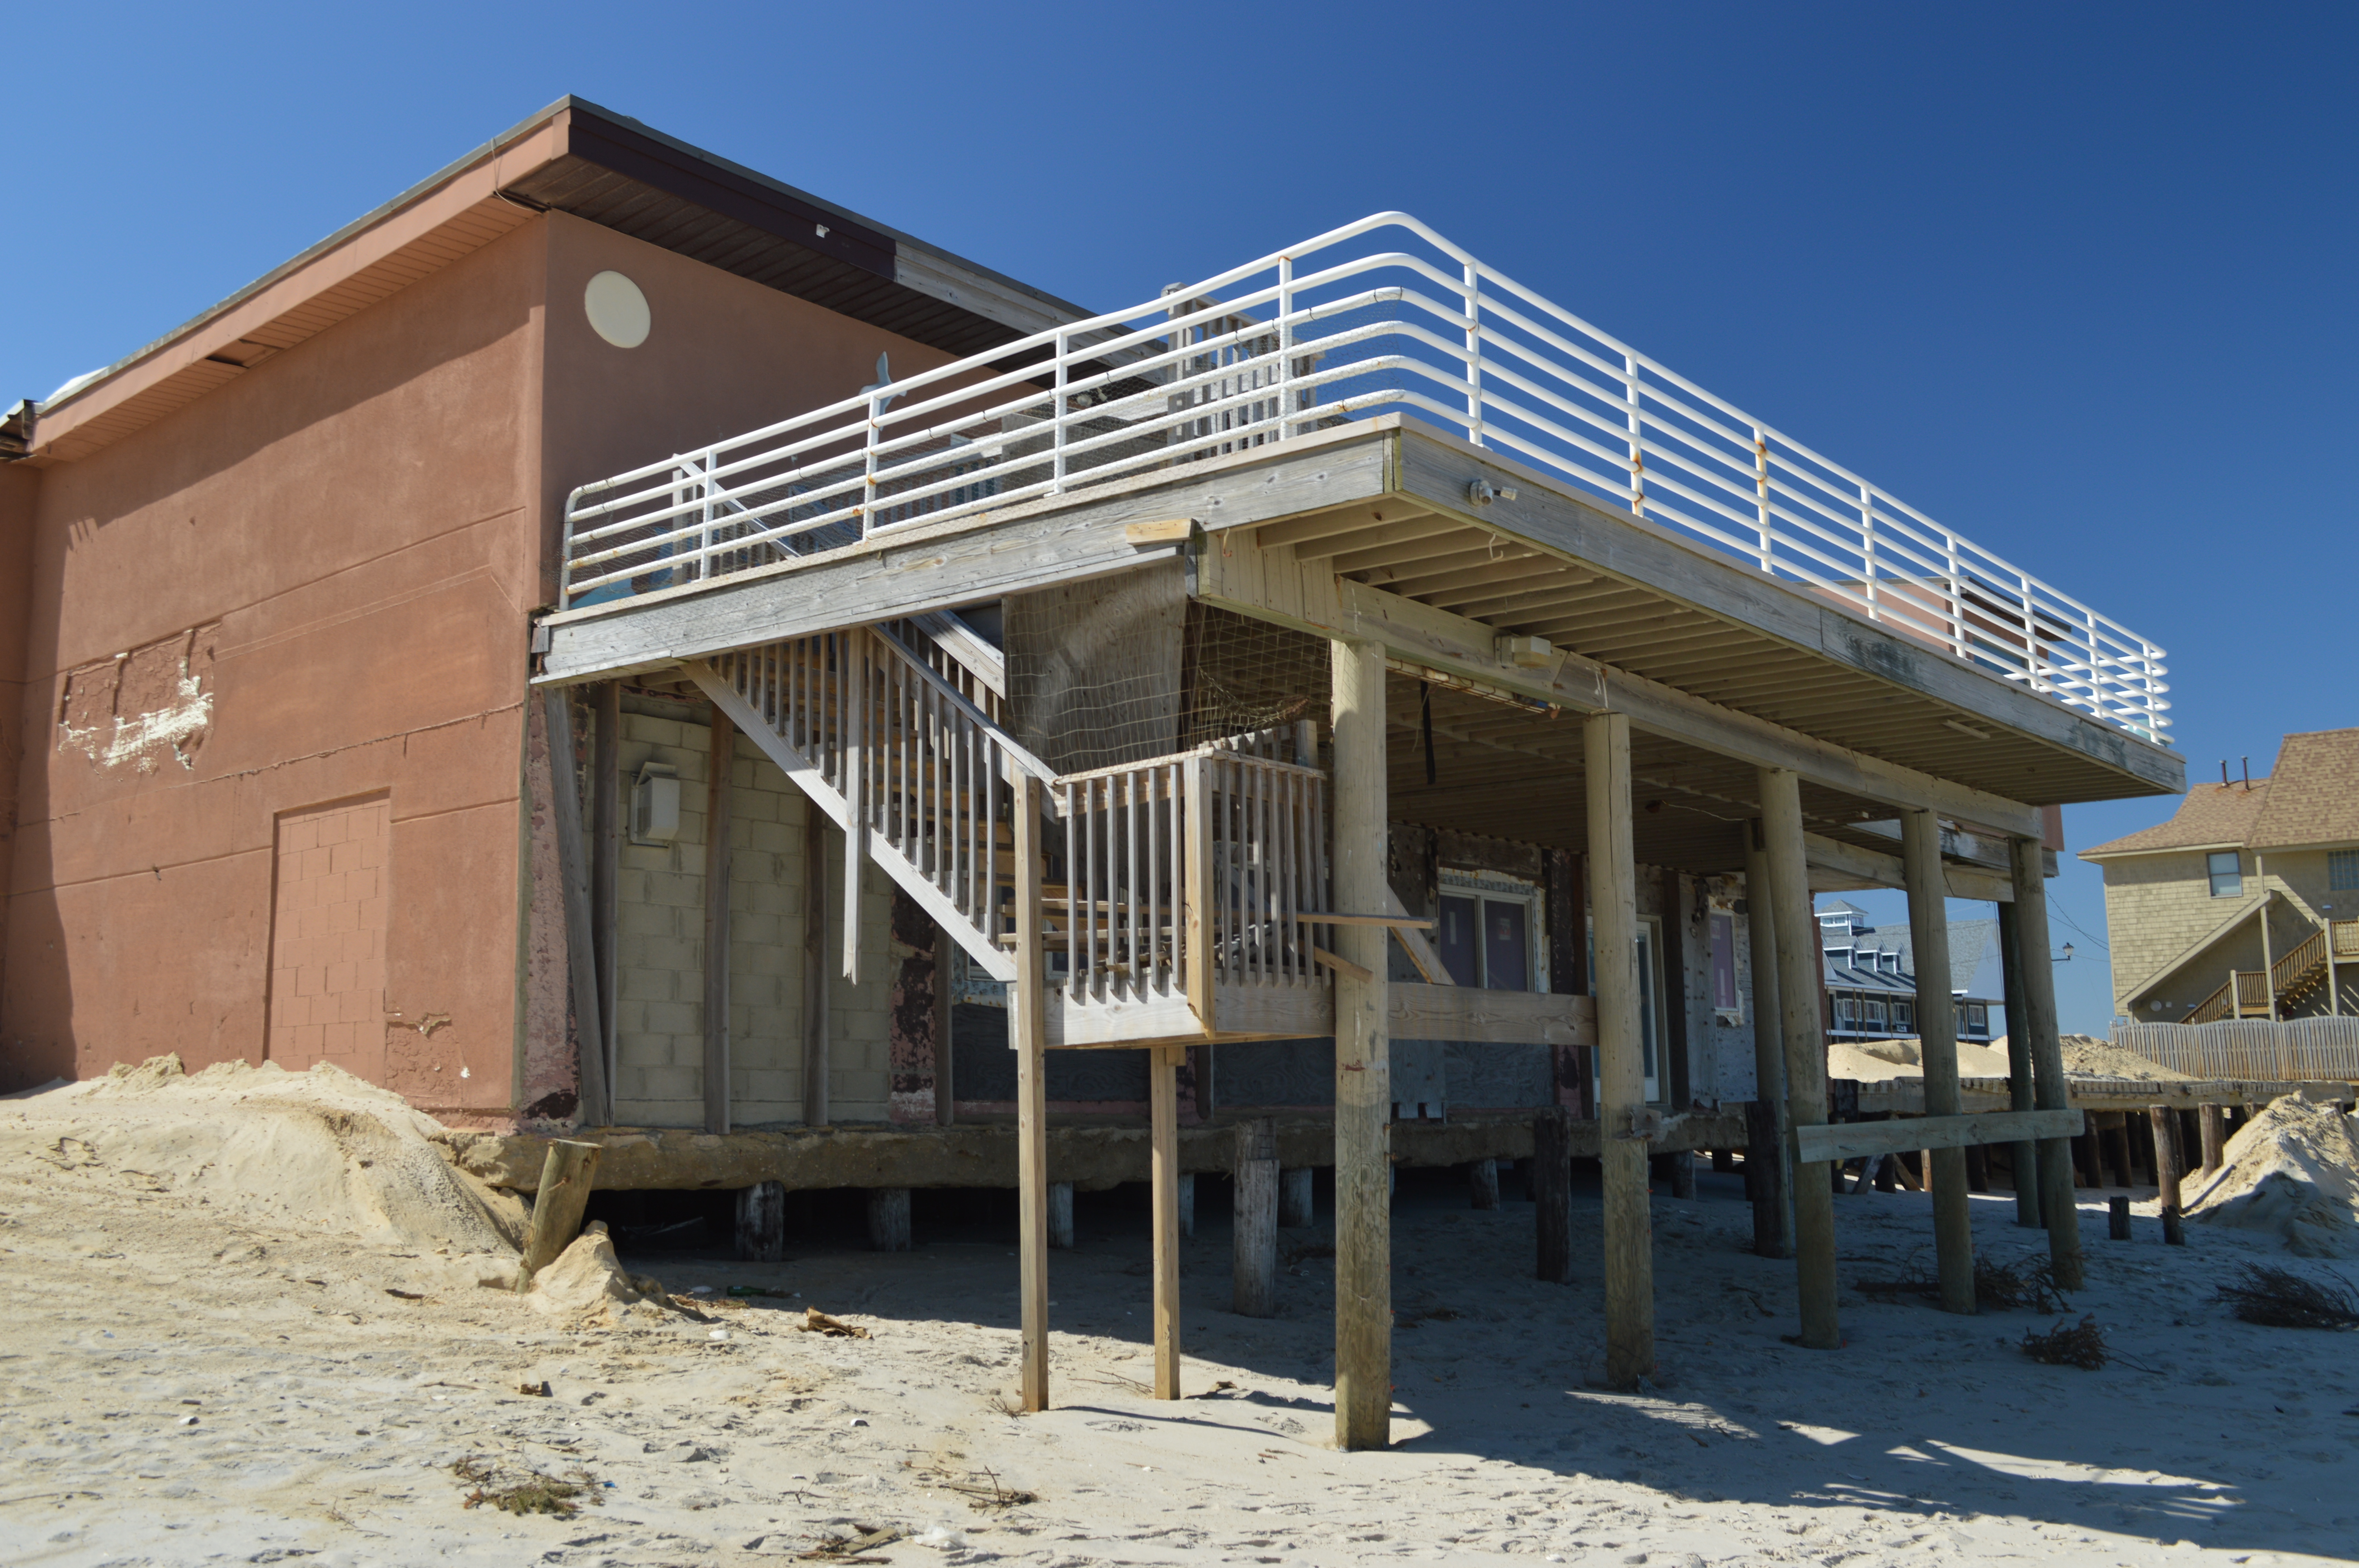 Remnants of the Surf Club in Ortley Beach, destroyed in Superstorm Sandy. (Photo: Daniel Nee)